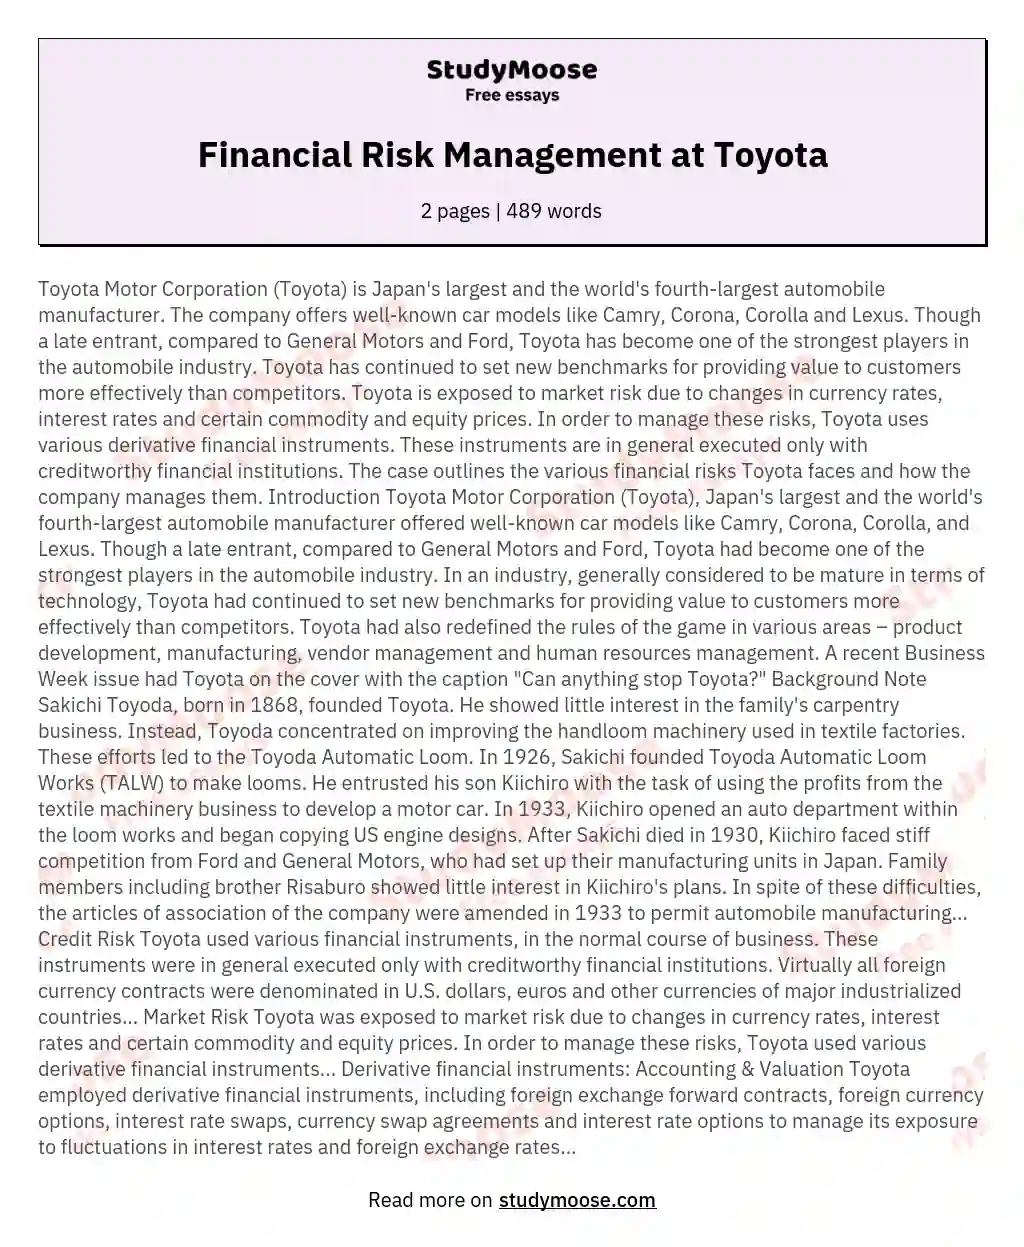 Financial Risk Management at Toyota essay